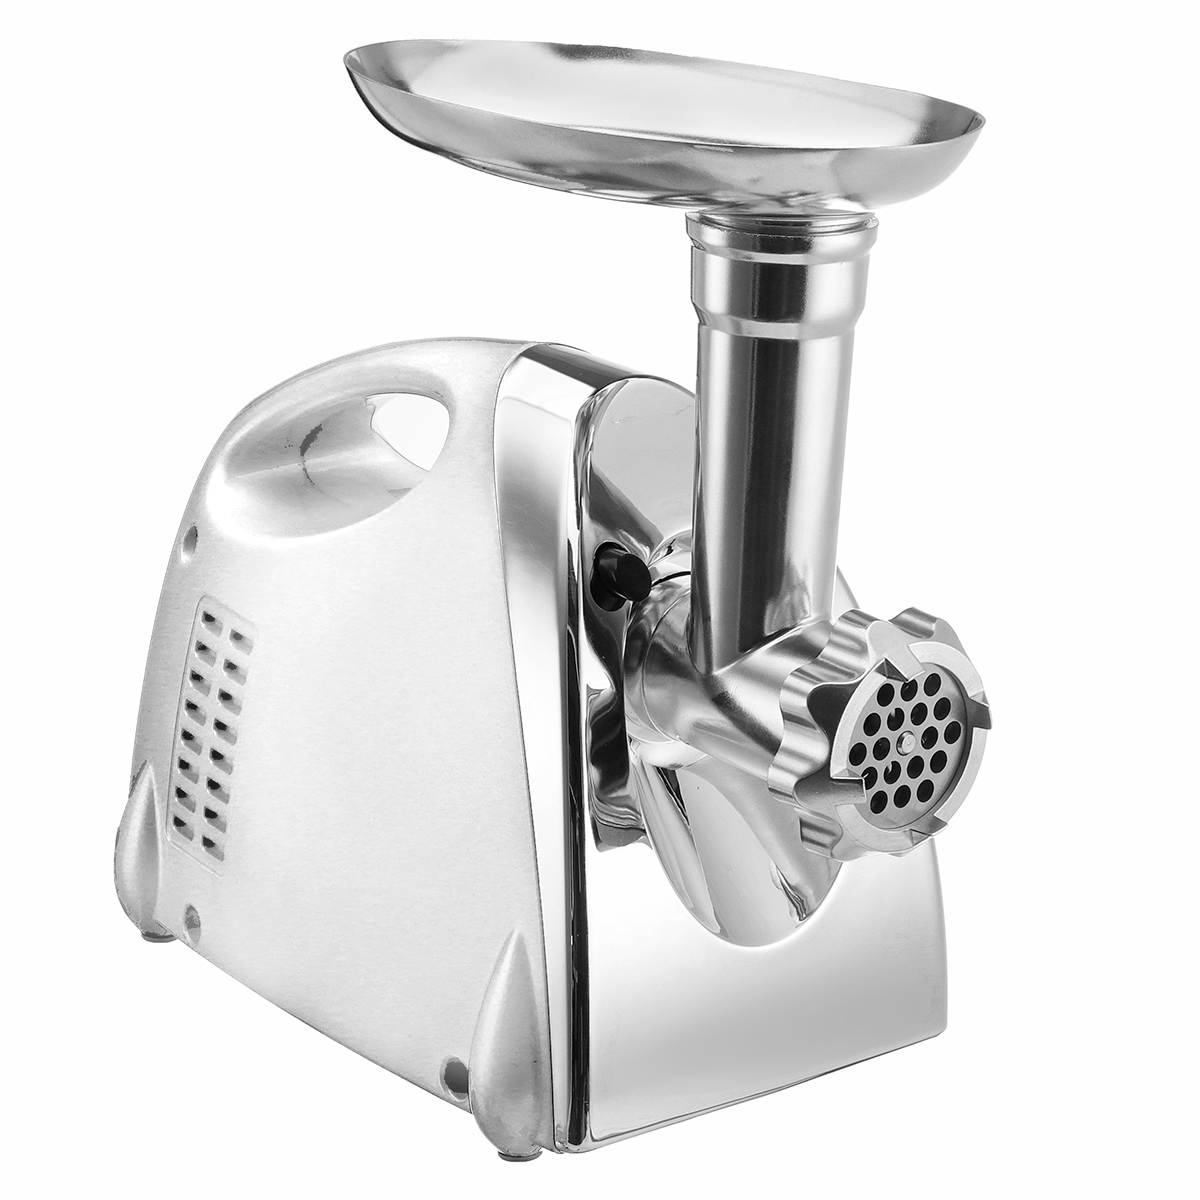 2800W Electric Meat Grinders Stainless Steel Powerful Electric Grinder Sausage Stuffer Meat Mincer Slicer for Kitchen Appliance